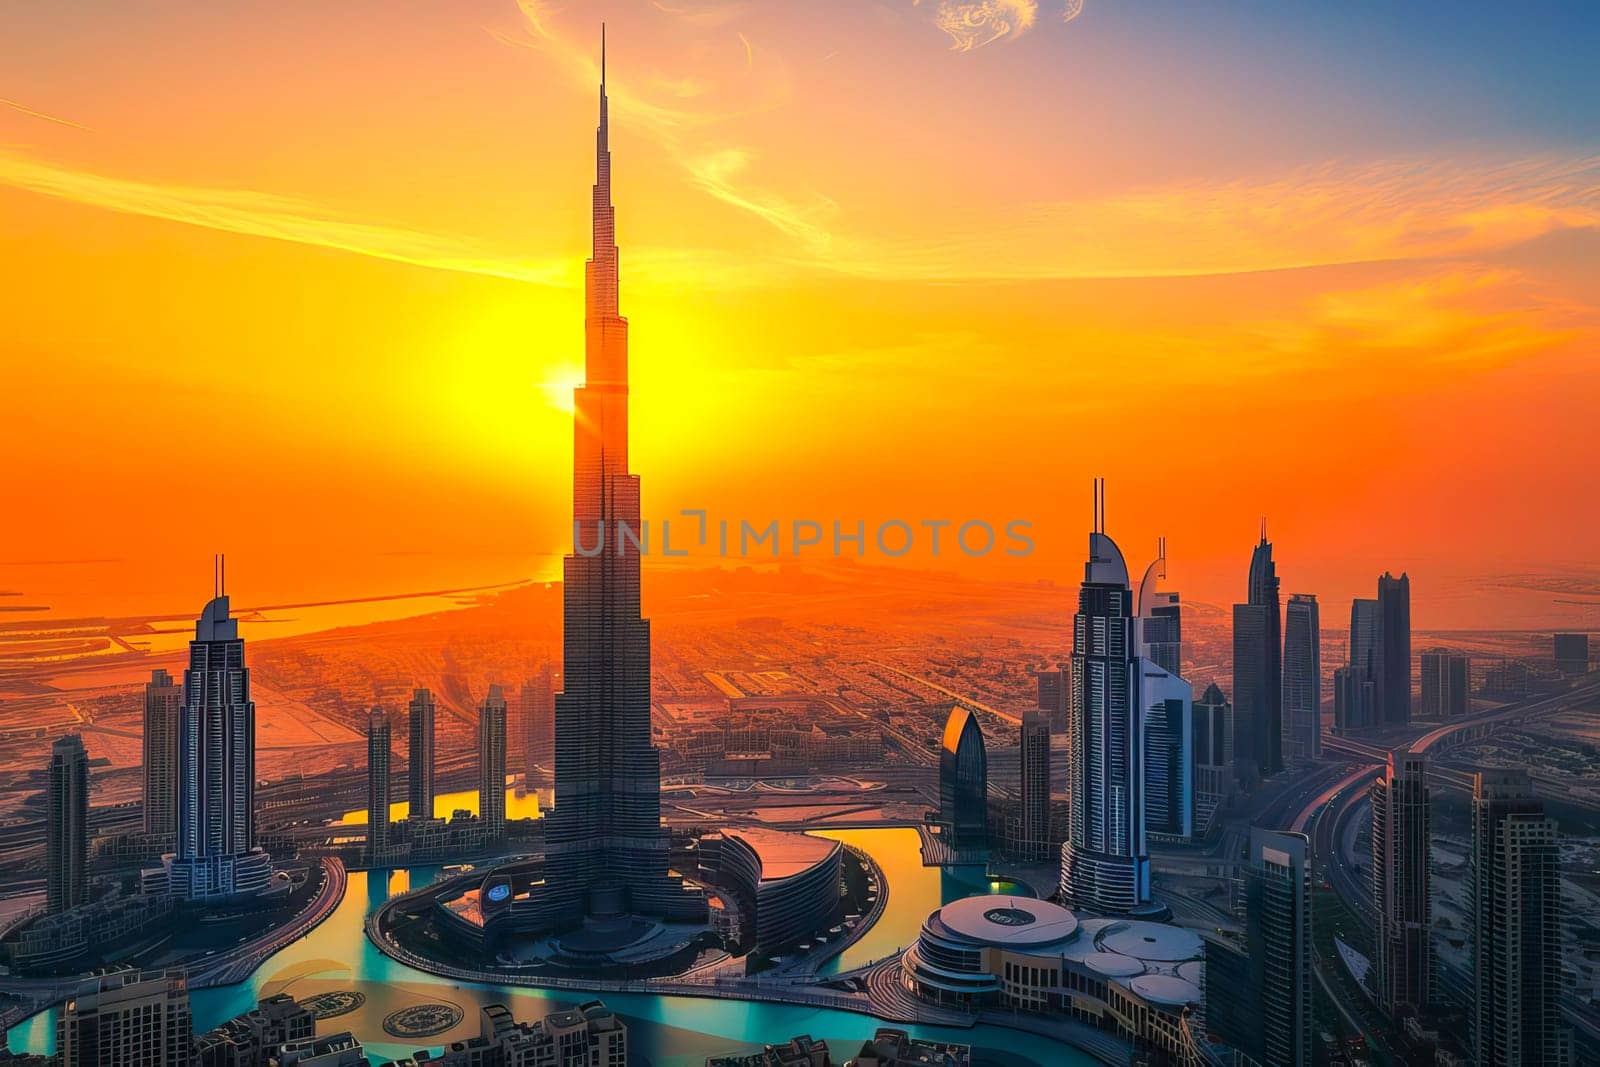 Aerial view capturing the Burj Khalifa standing tall amidst the cityscape during sunset.